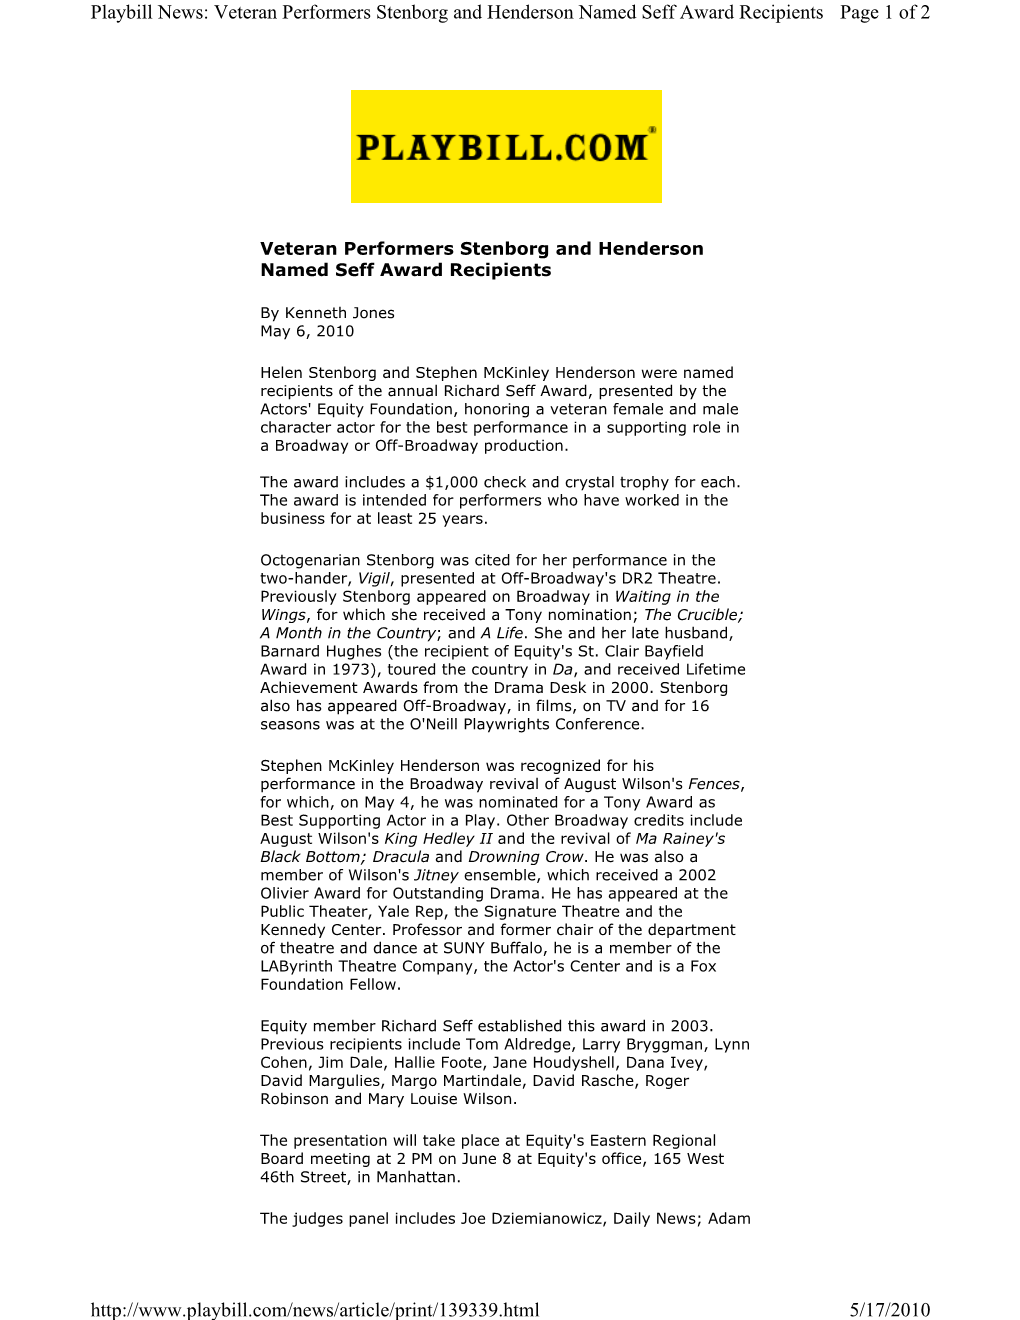 Page 1 of 2 Playbill News: Veteran Performers Stenborg And